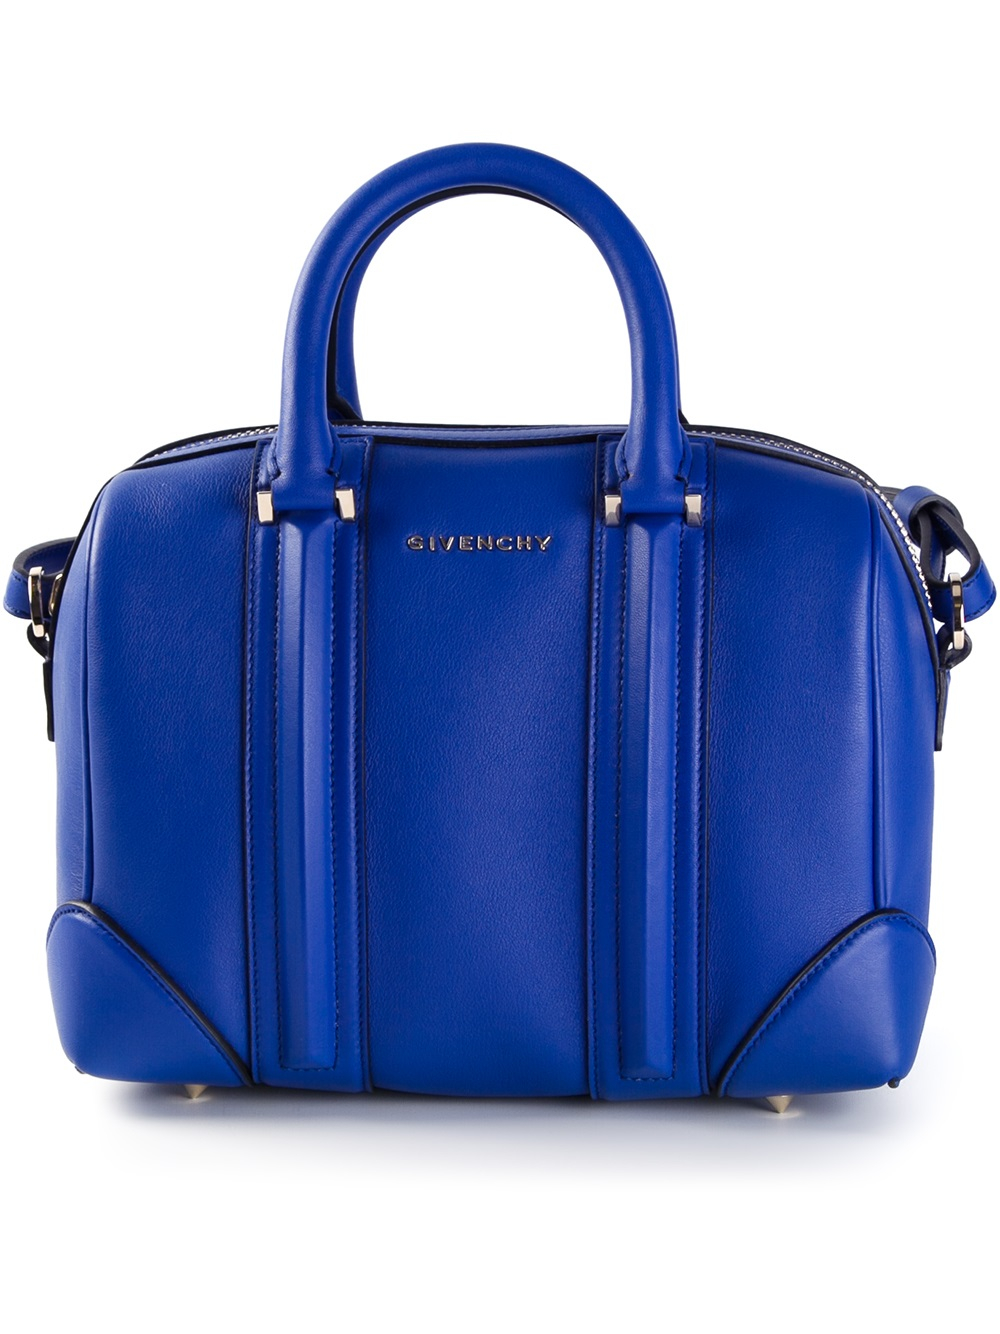 Givenchy Lucrezia Mini Tote in Blue - Lyst